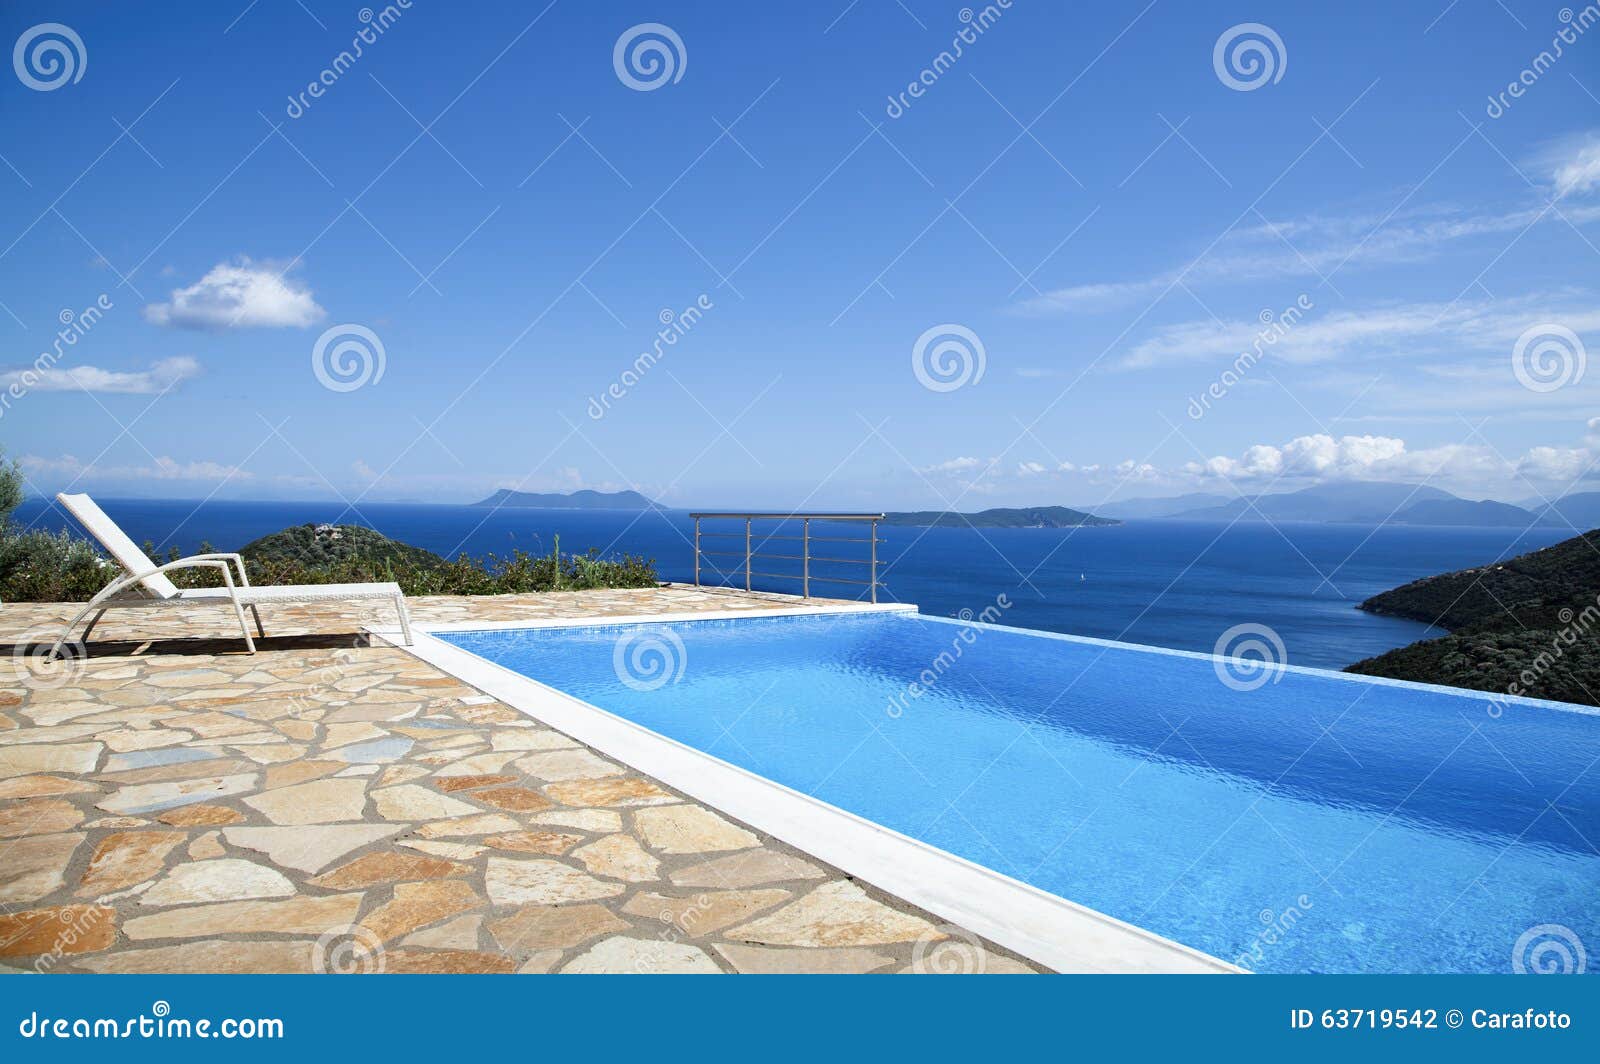 beautiful views of the infinity pool by the sea